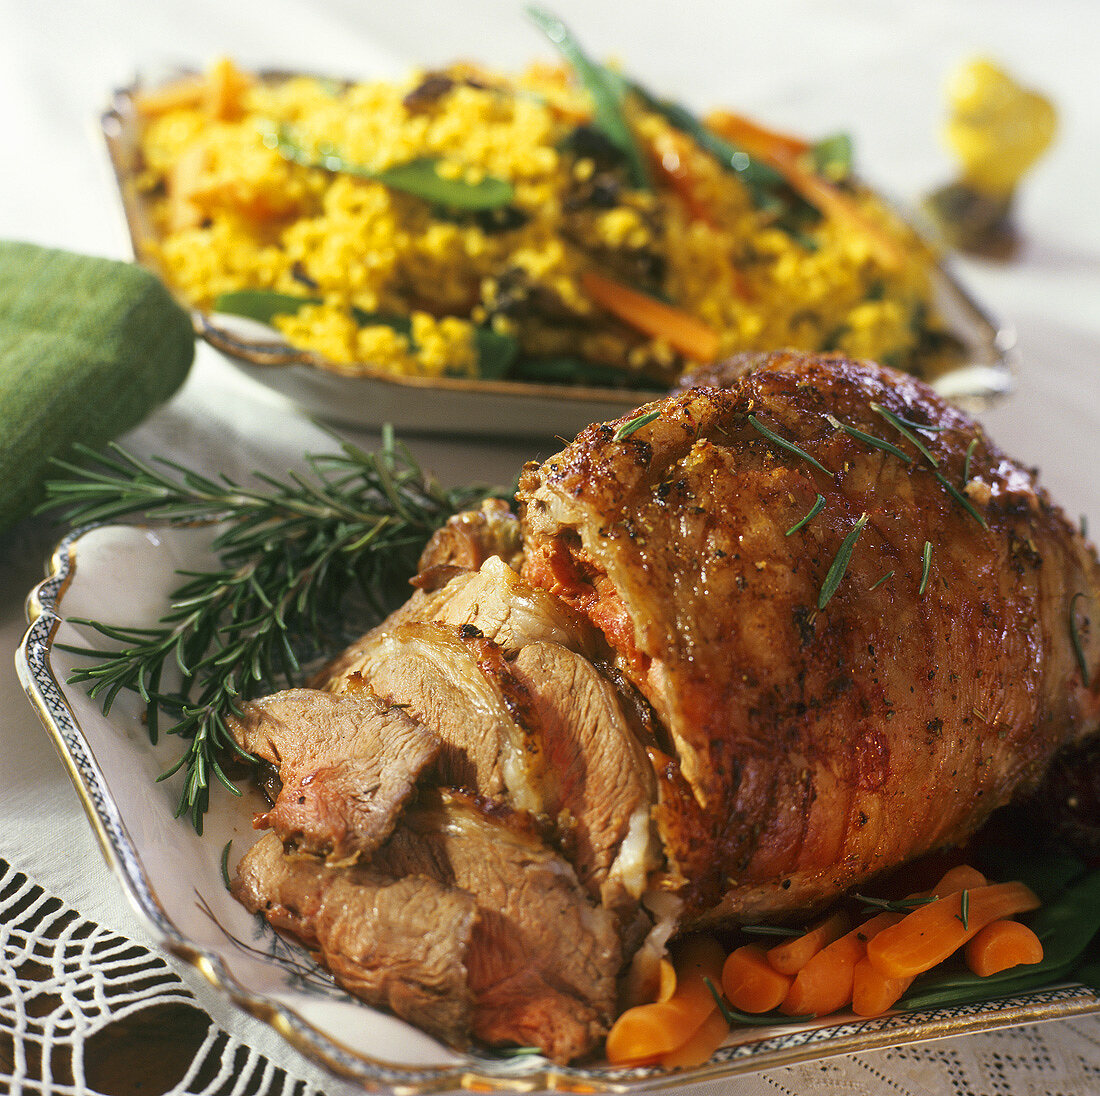 Roast lamb with a side dish of bulgur and vegetables